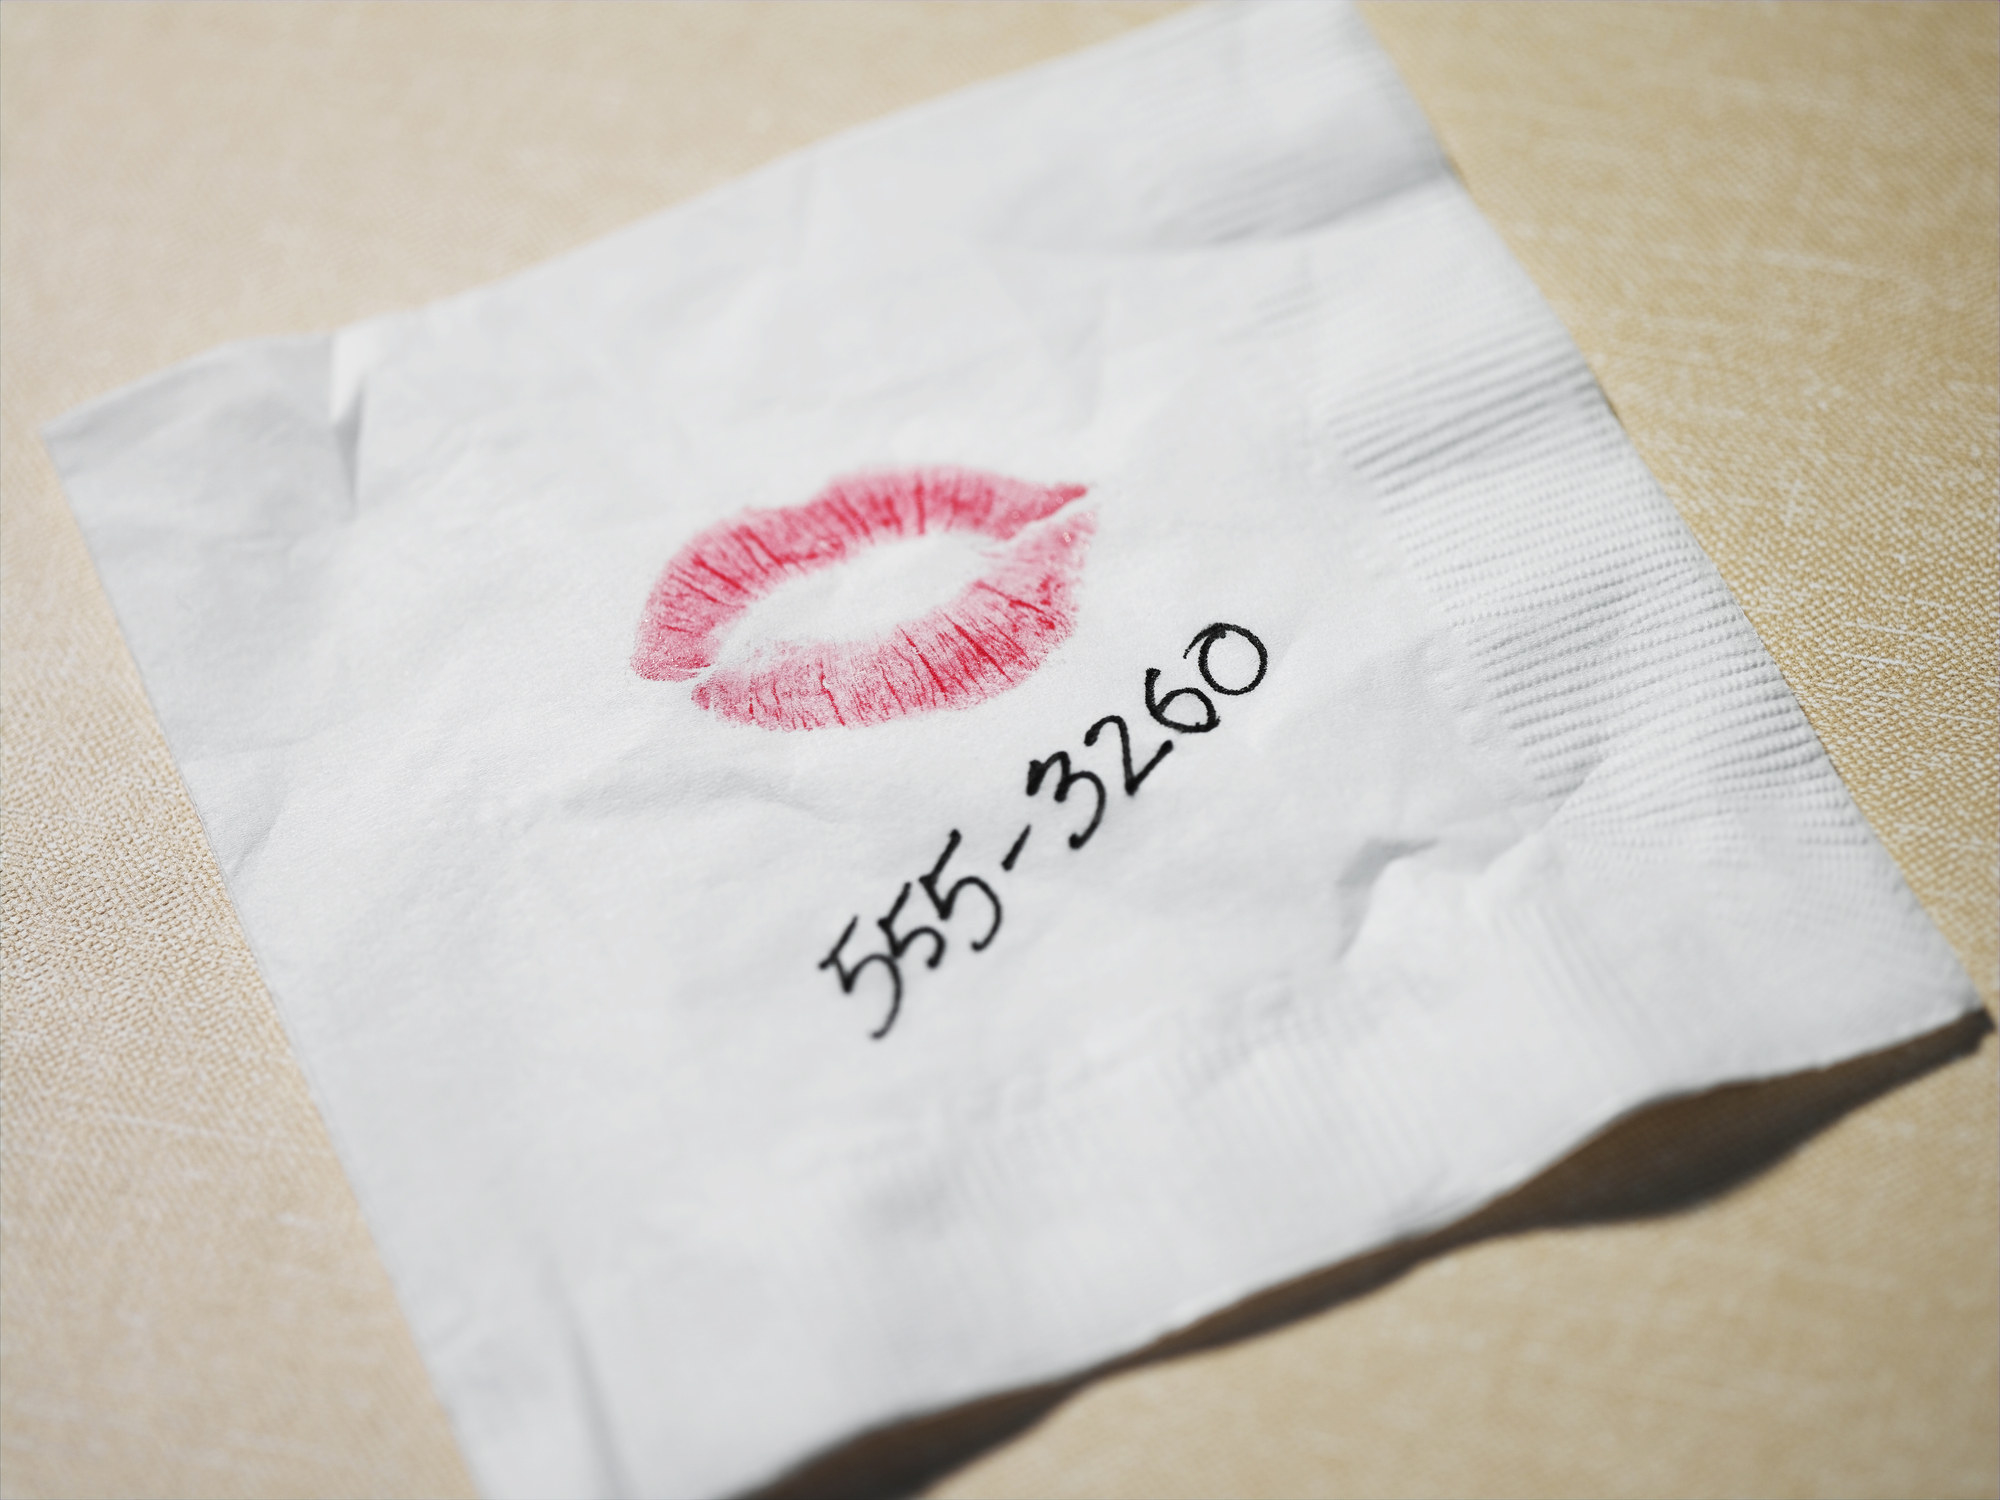 The number 555-3260 on a napkin along with the outline of lips with lipstick